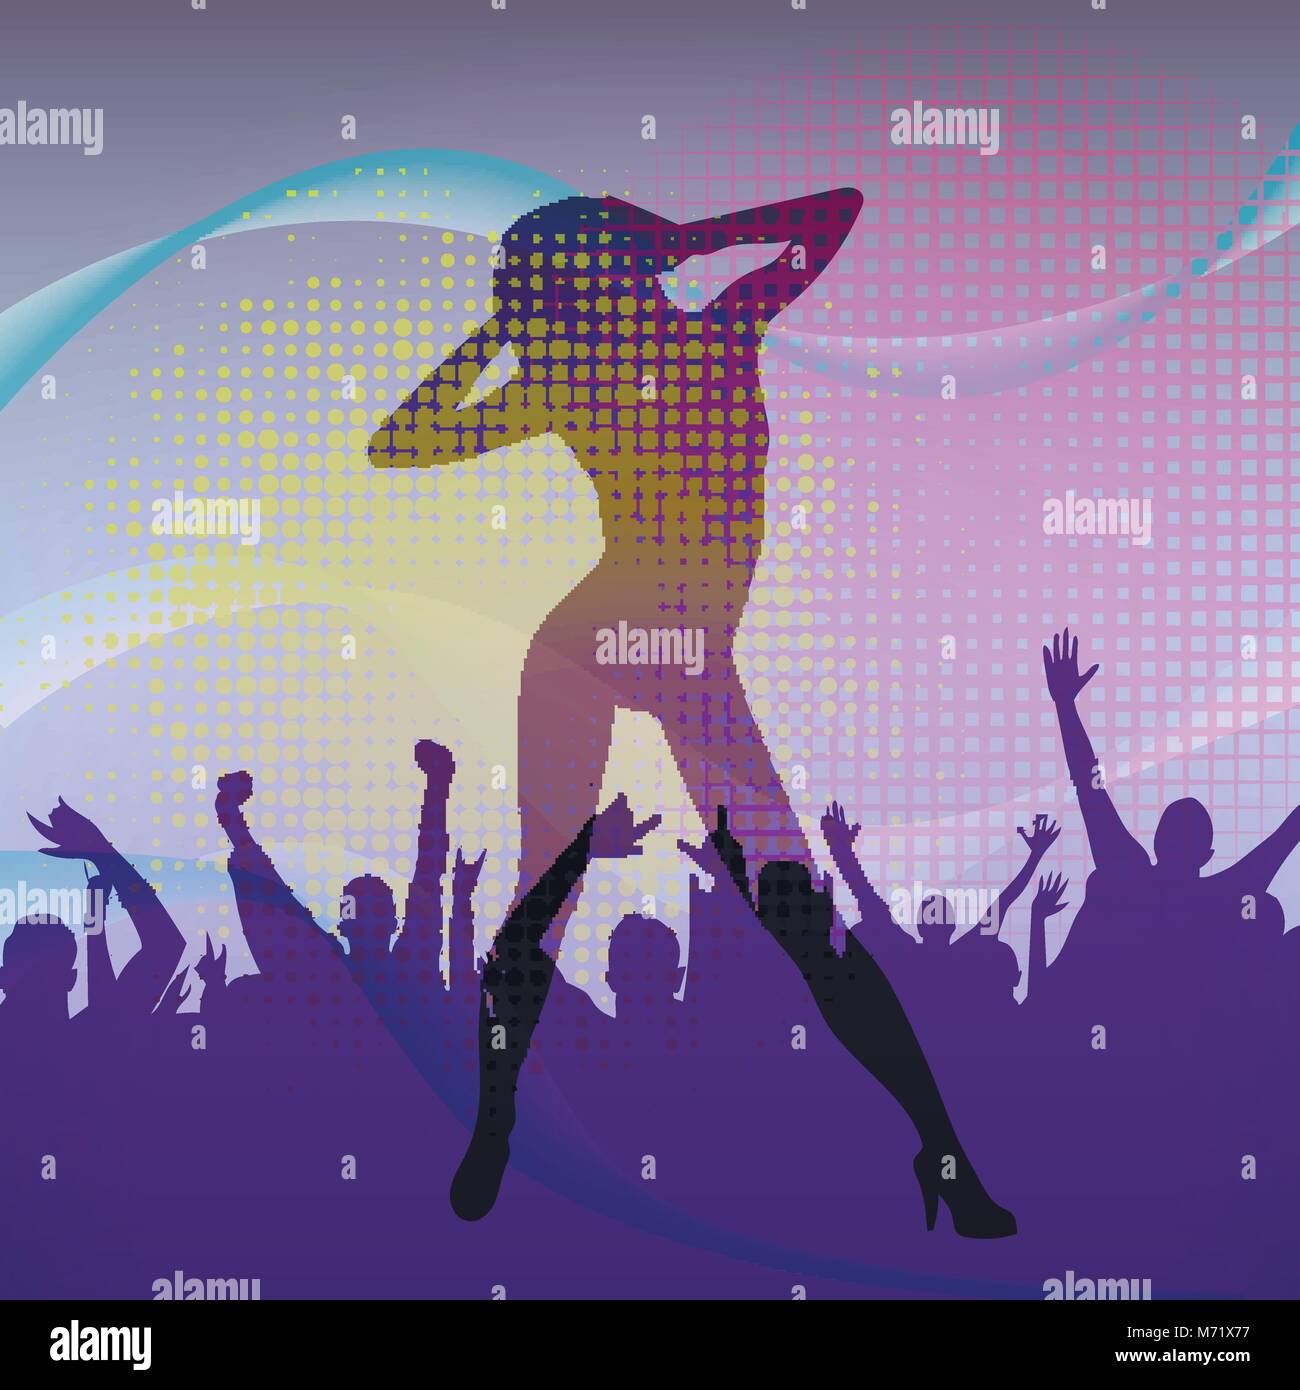 The dancing girl silhouette in nightclub with dancing crowd. Vector illustration. Stock Vector